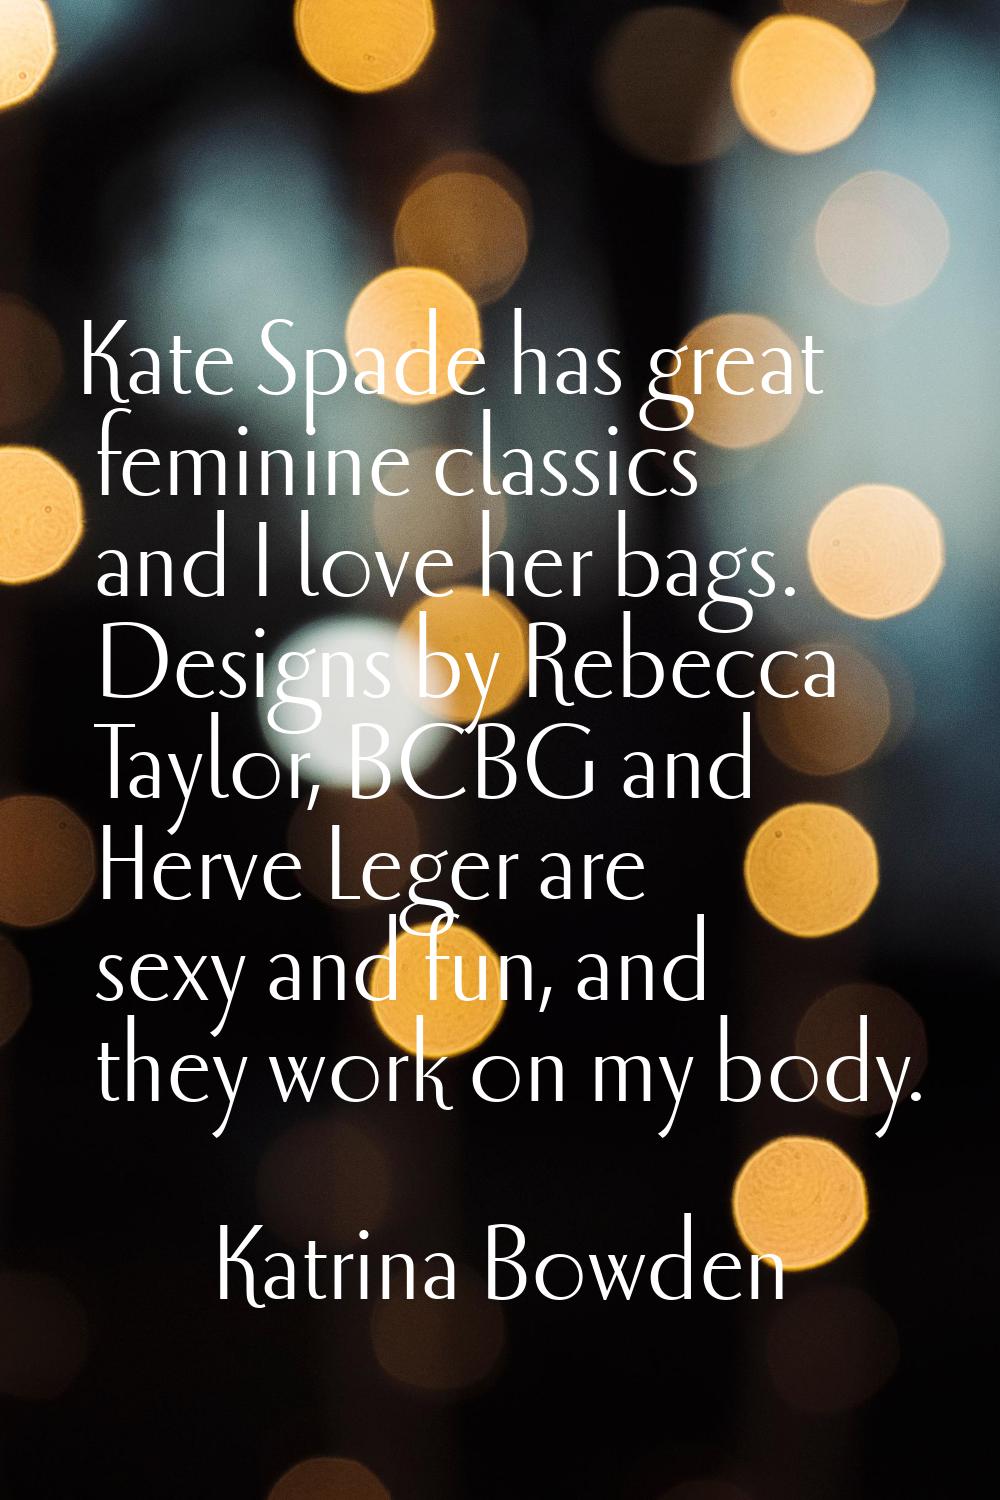 Kate Spade has great feminine classics and I love her bags. Designs by Rebecca Taylor, BCBG and Her